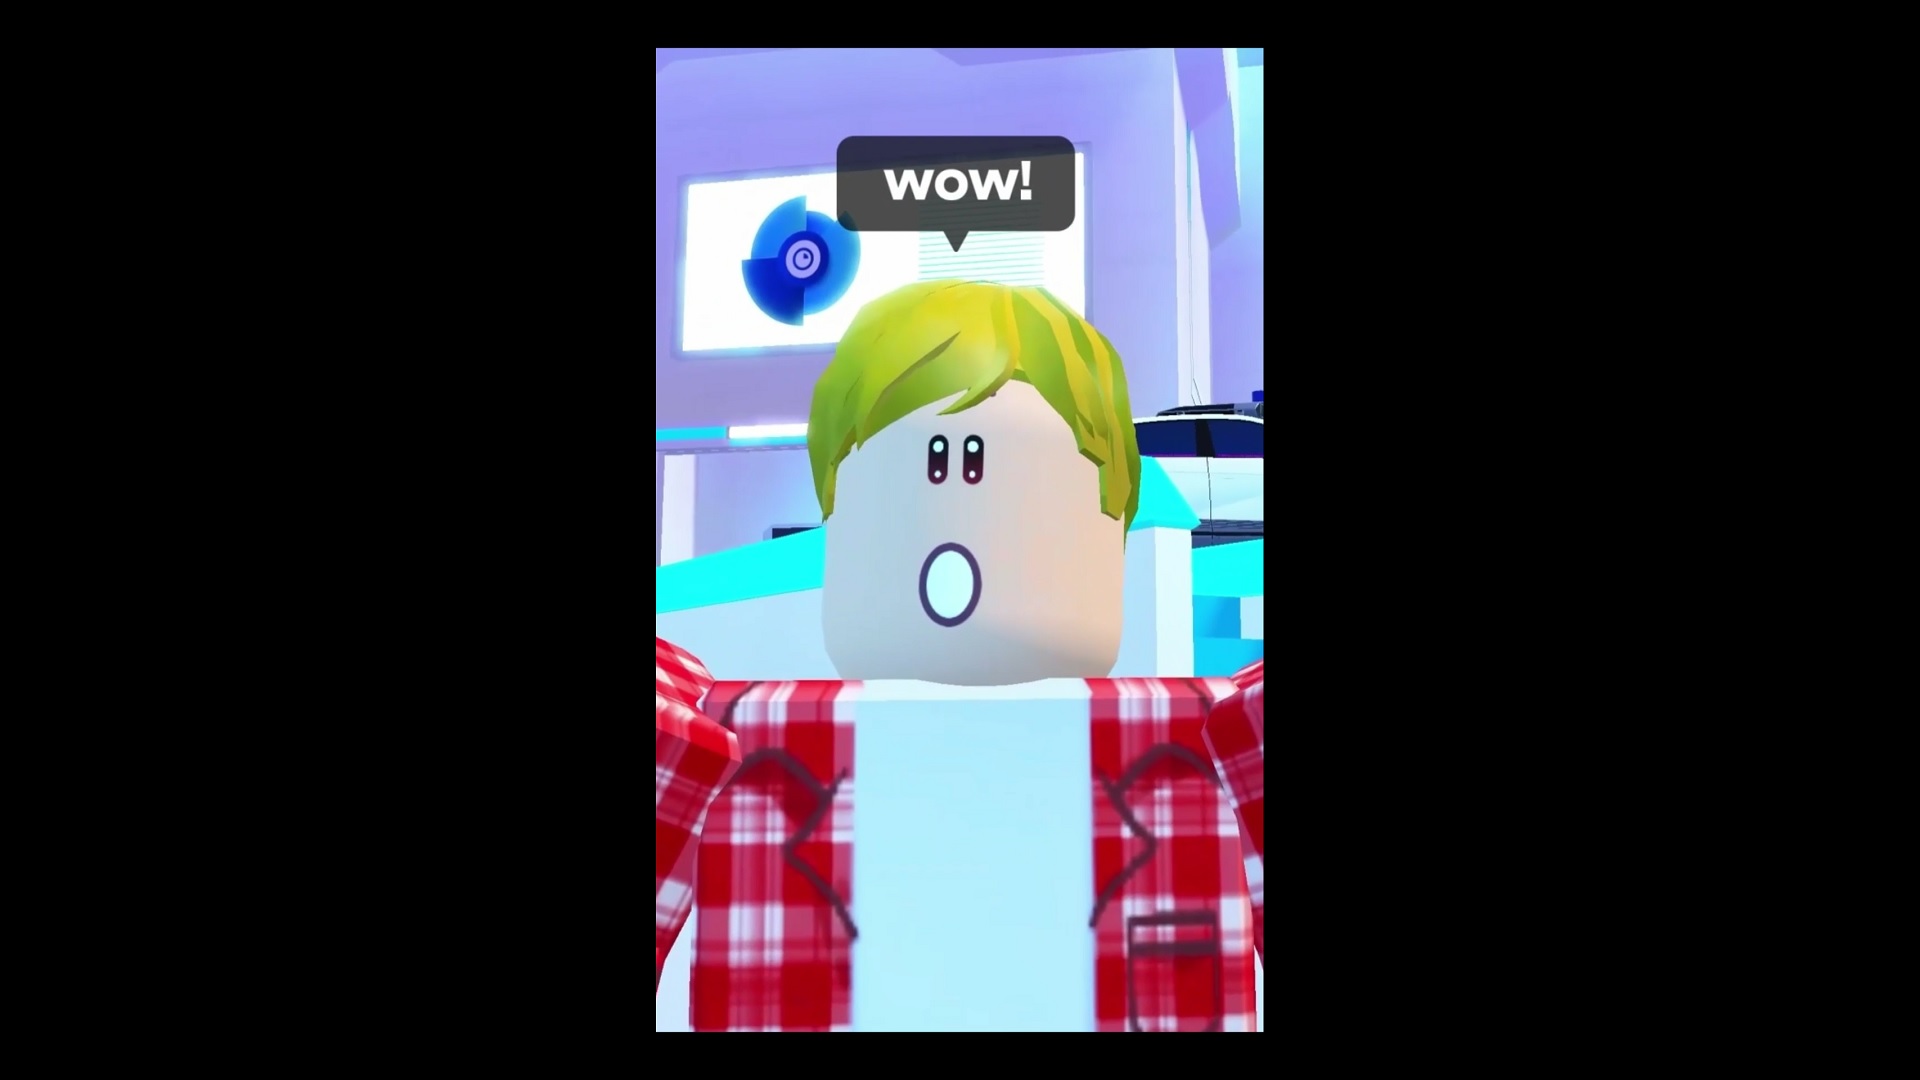 NOOB Goes PRO And SHOCKS EVERYONE In Roblox Funky Friday 